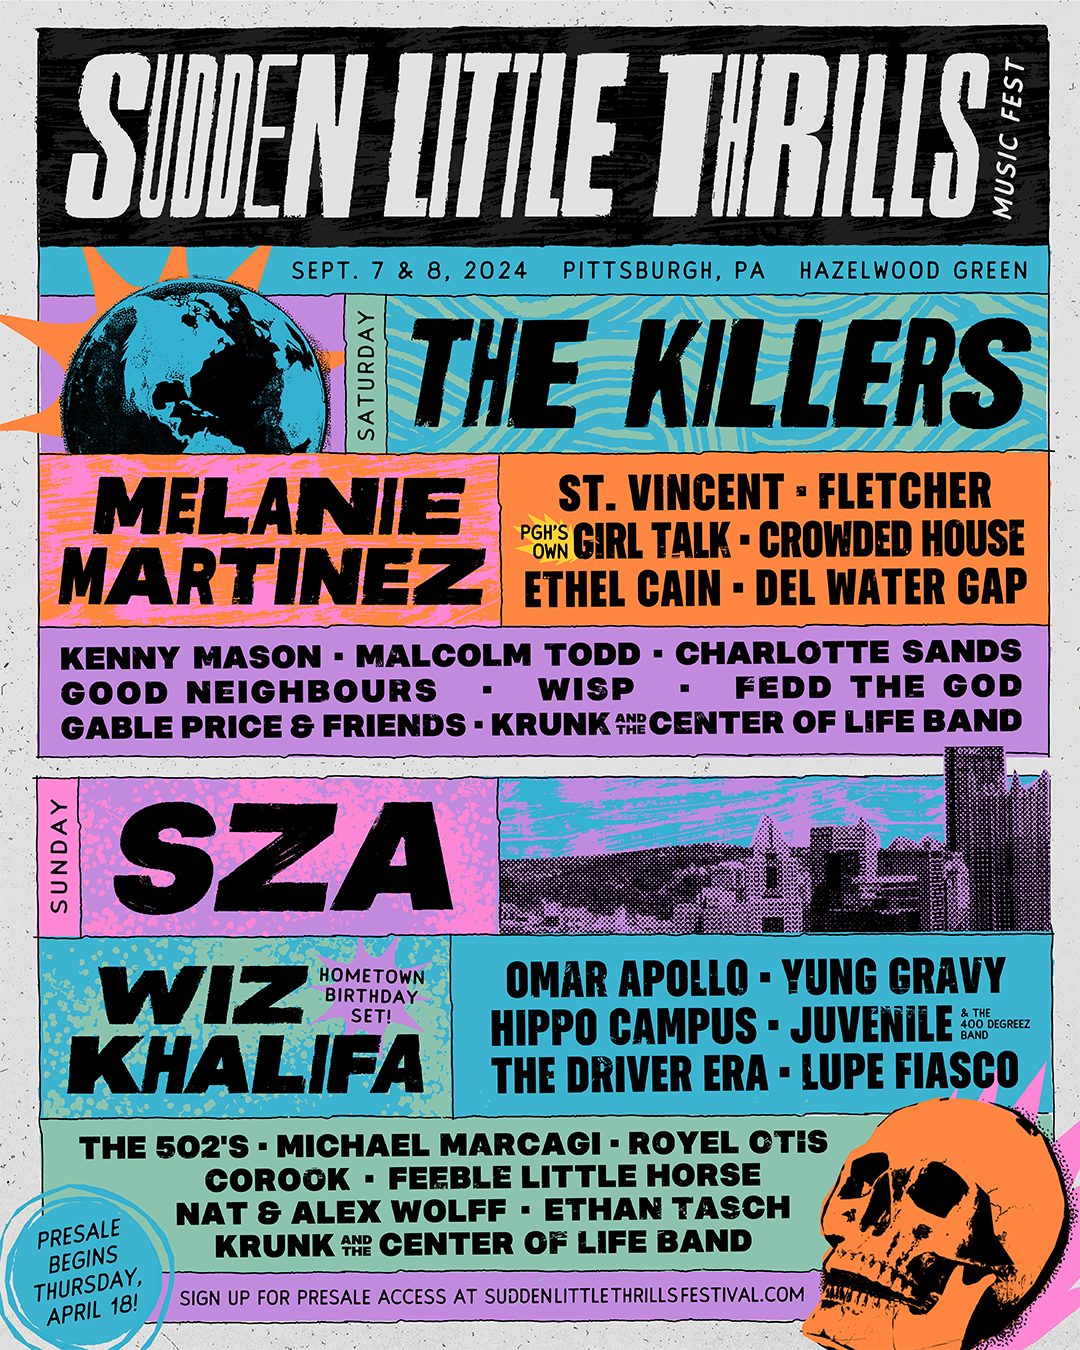 Sudden Little Thrills 2024 Lineup: The Killers, SZA, Melanie Martinez, Wiz Khalifa, St. Vincent, Fletcher, Girl Talk, Crowded House, Ethel Cain, Del Water Gap, Omar Apollo, Yung Gravy, Hippo Campus, Juvenile, The Driver Era, Lupe Fiasco, and more